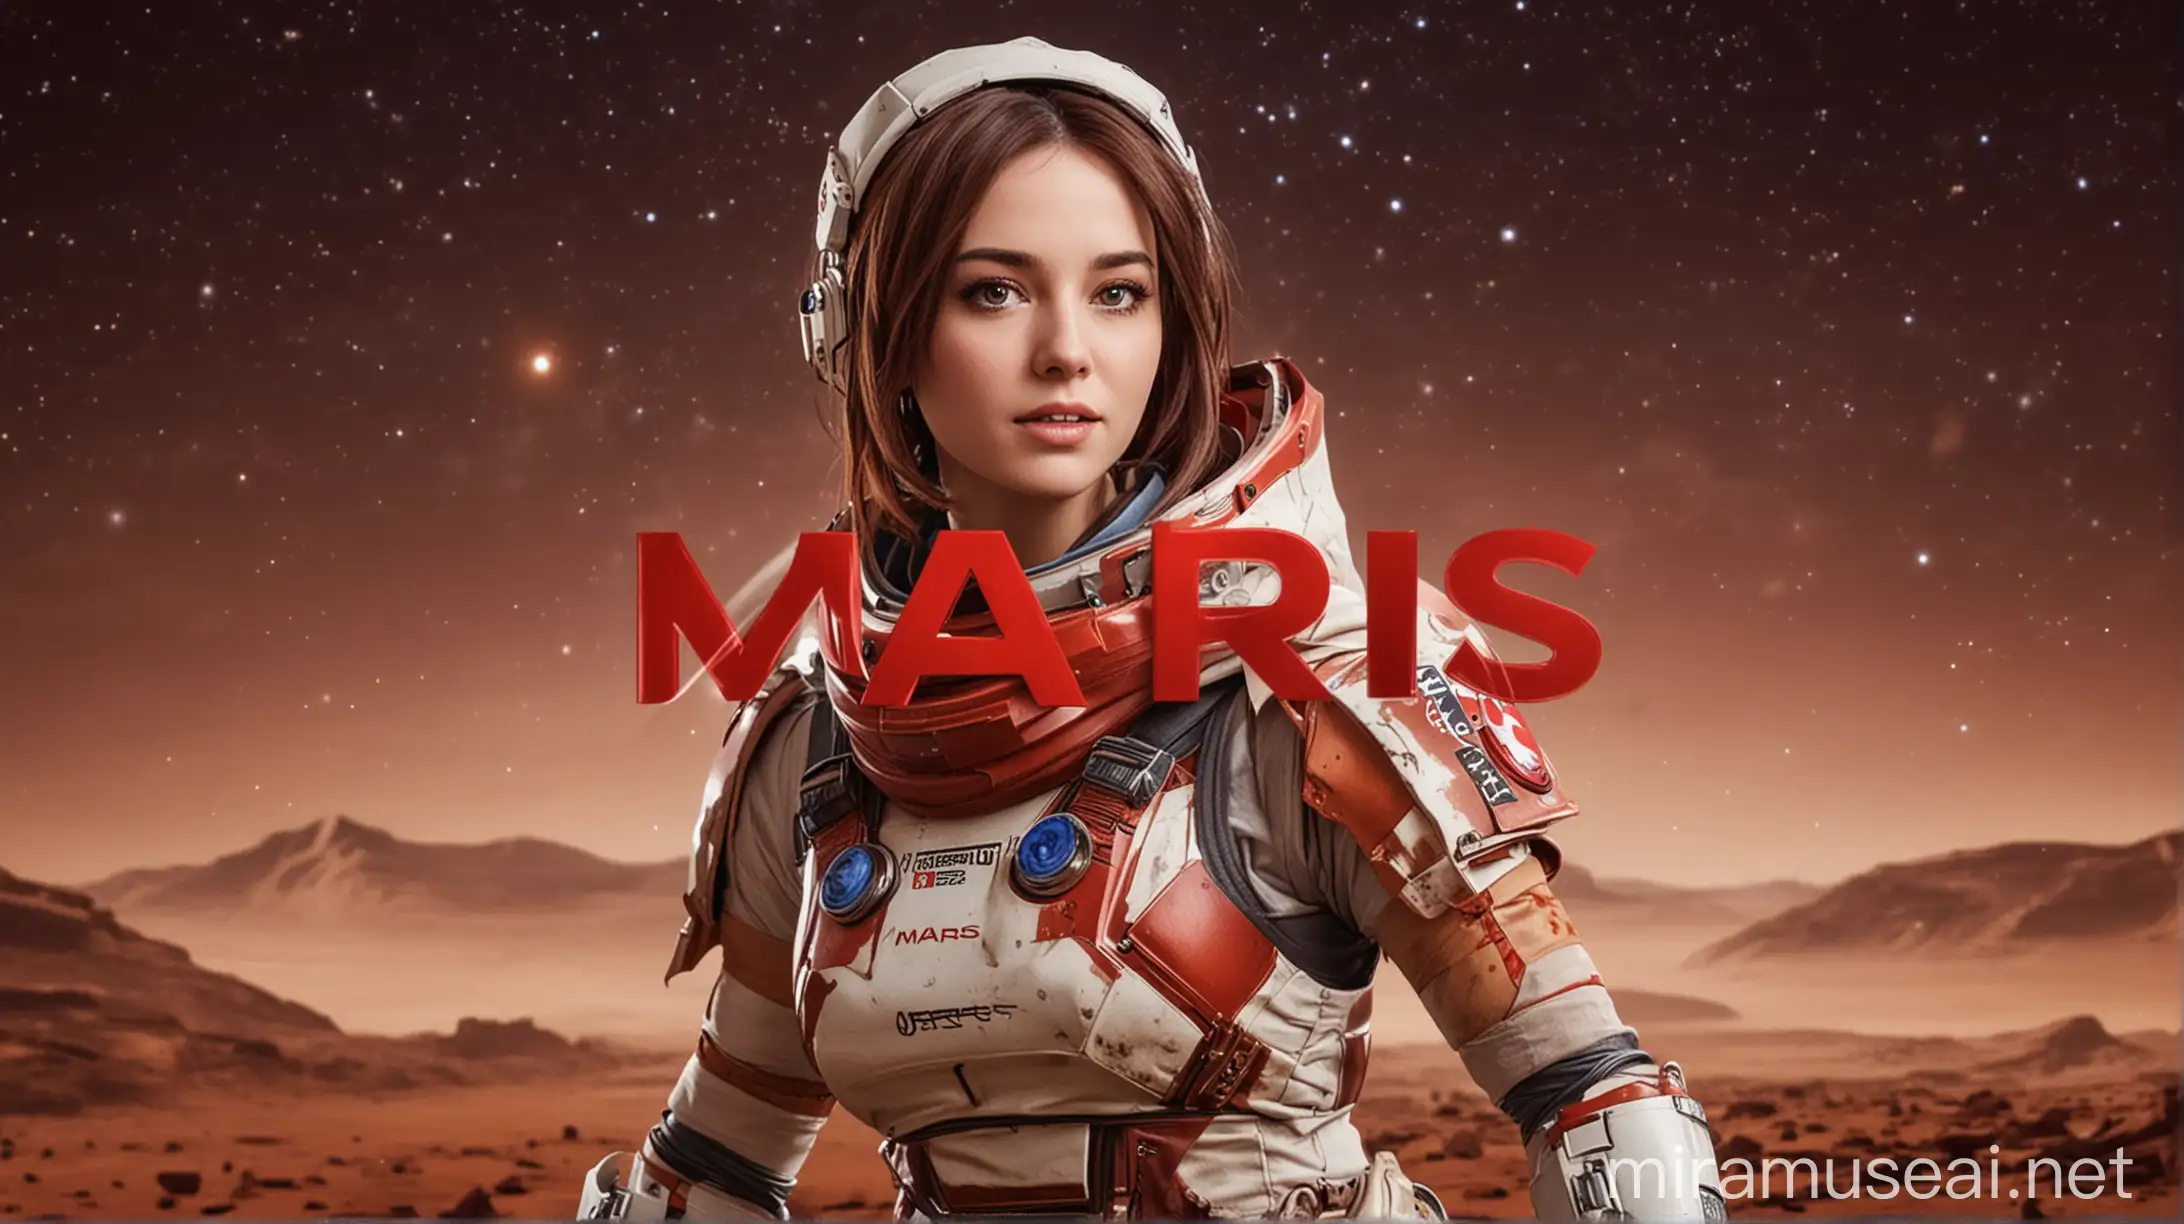 do a background for a talking head video, the name of the company is mars, put text in the background that says mars, the brand is based around cosplay